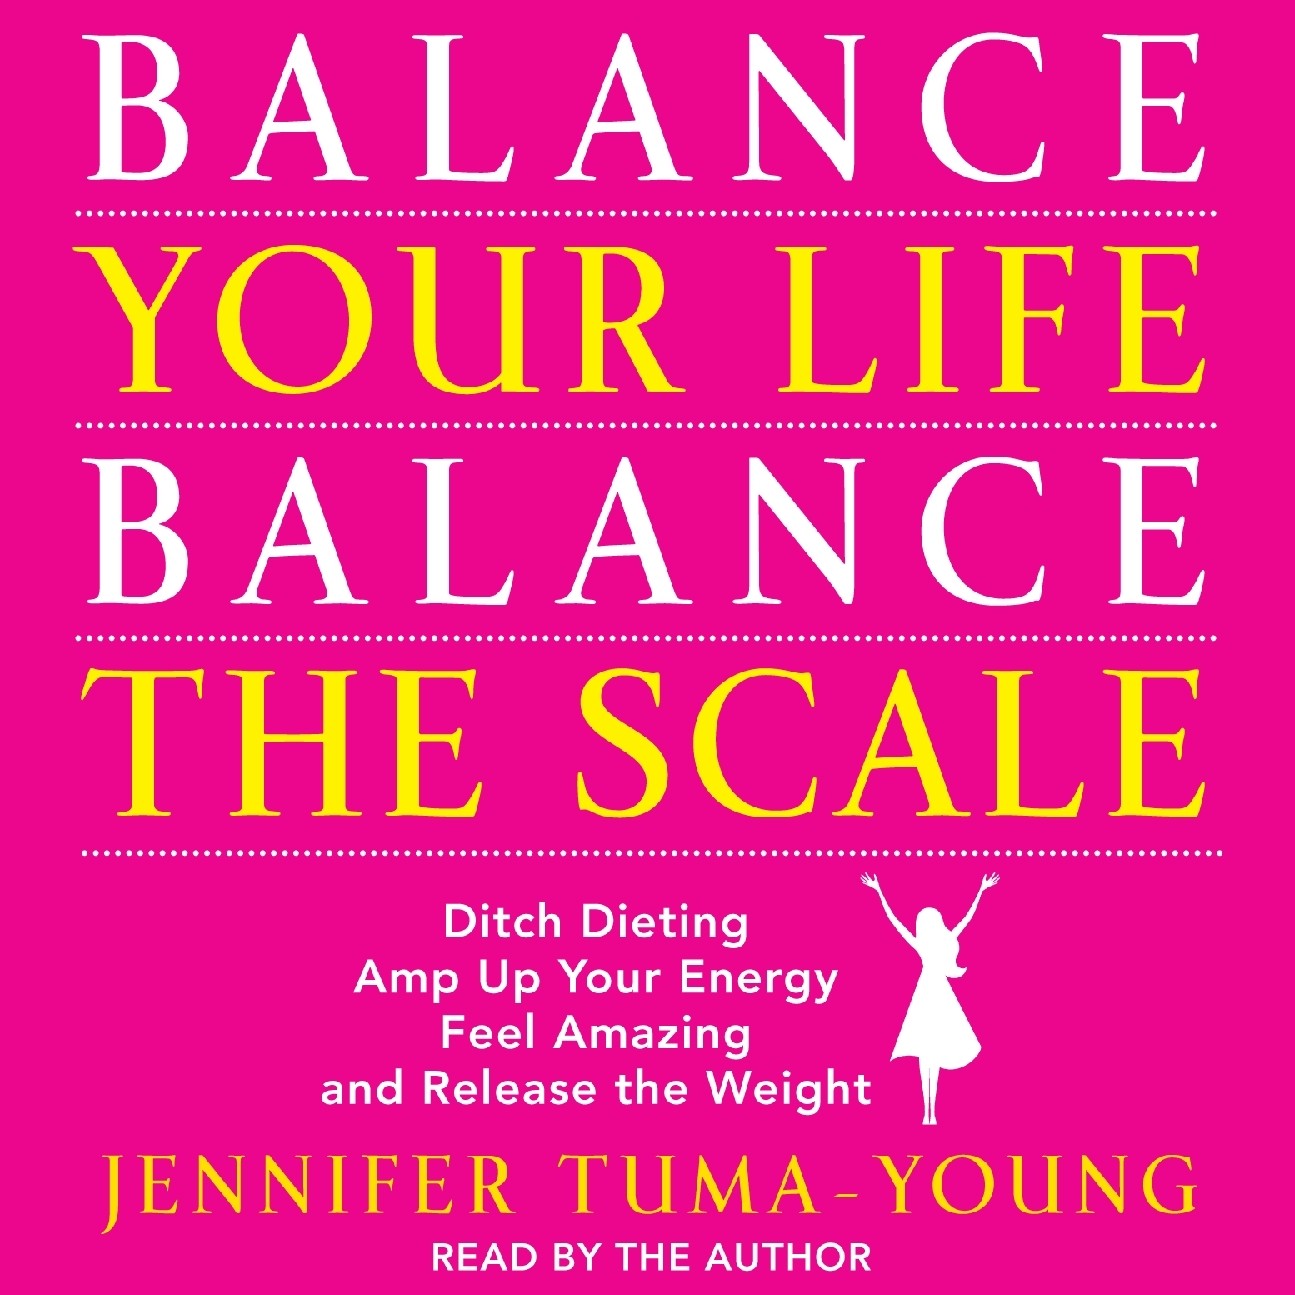 Balance Your Life, Balance the Scale: Ditch Dieting, Amp Up Your Energy, Feel Amazing, and Release the Weight Audiobook, by Jennifer Tuma-Young